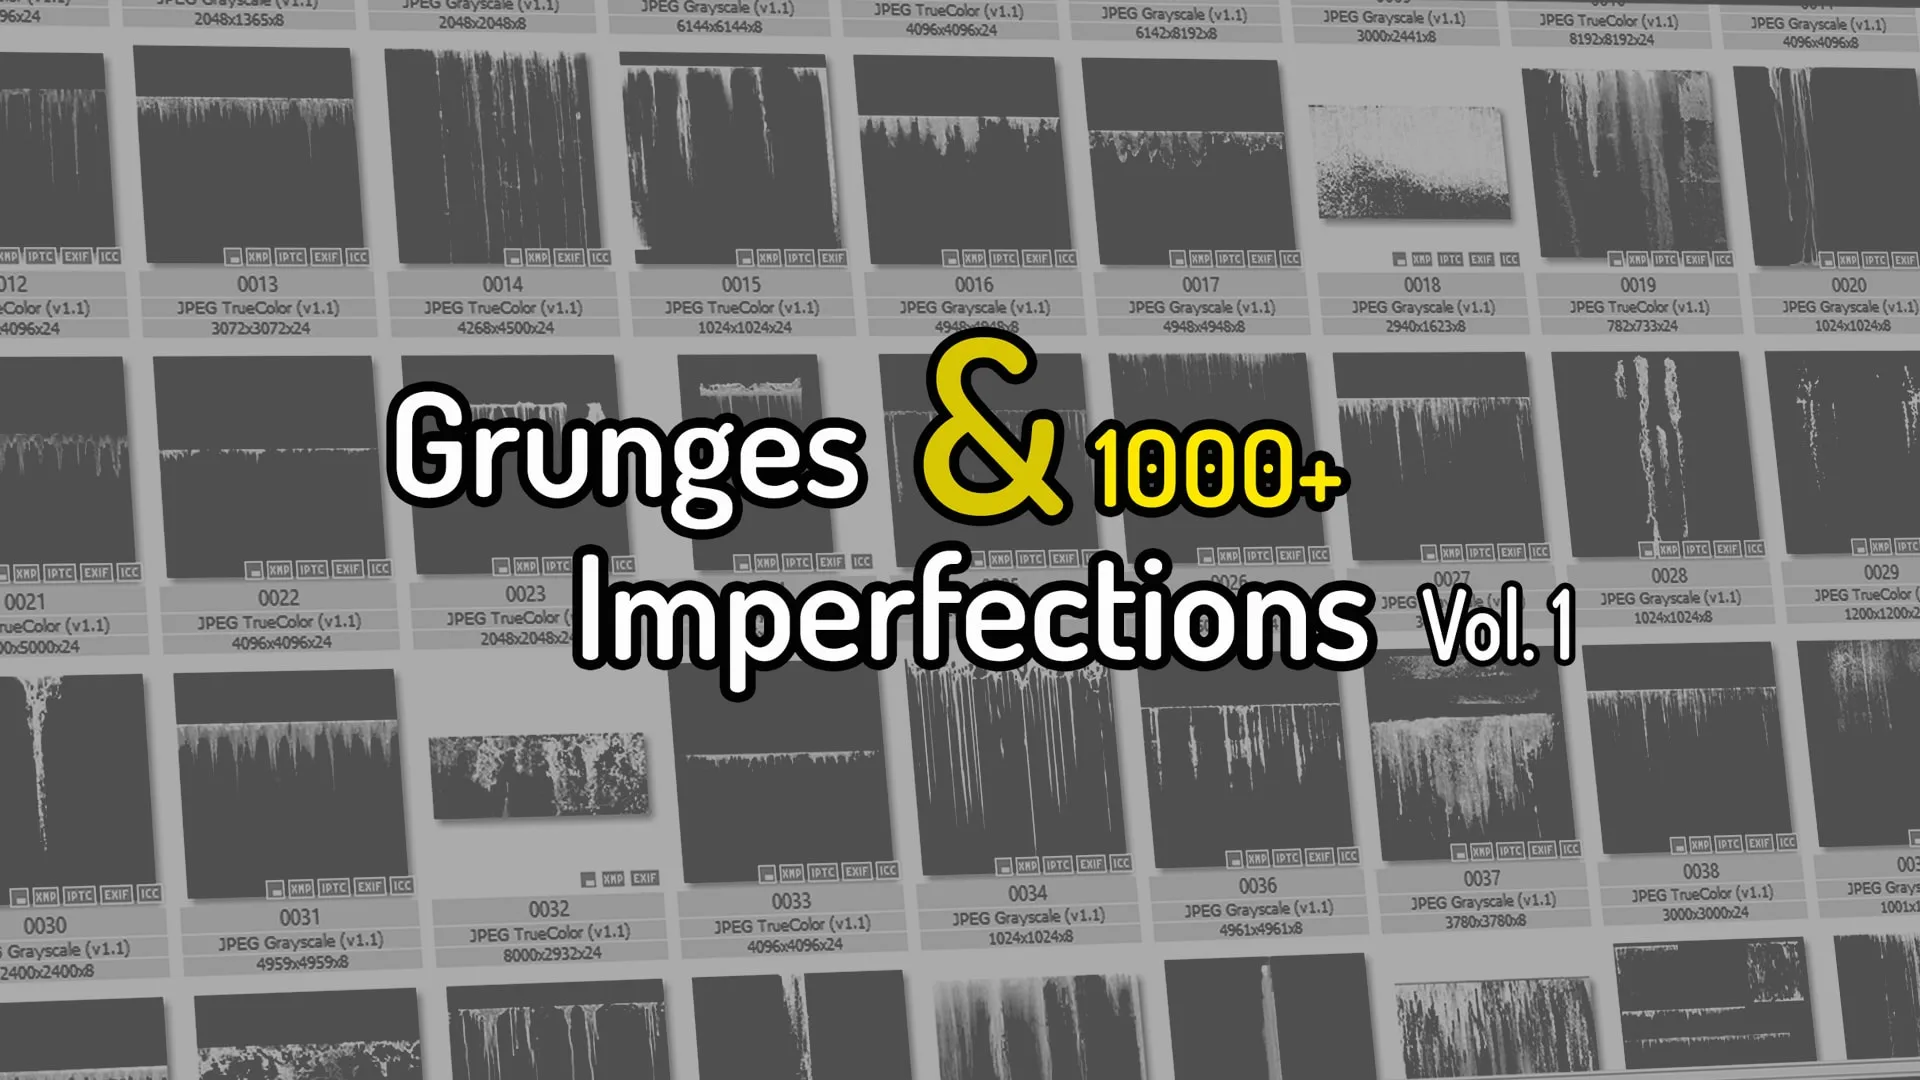 1000+ Grunge & Imperfections